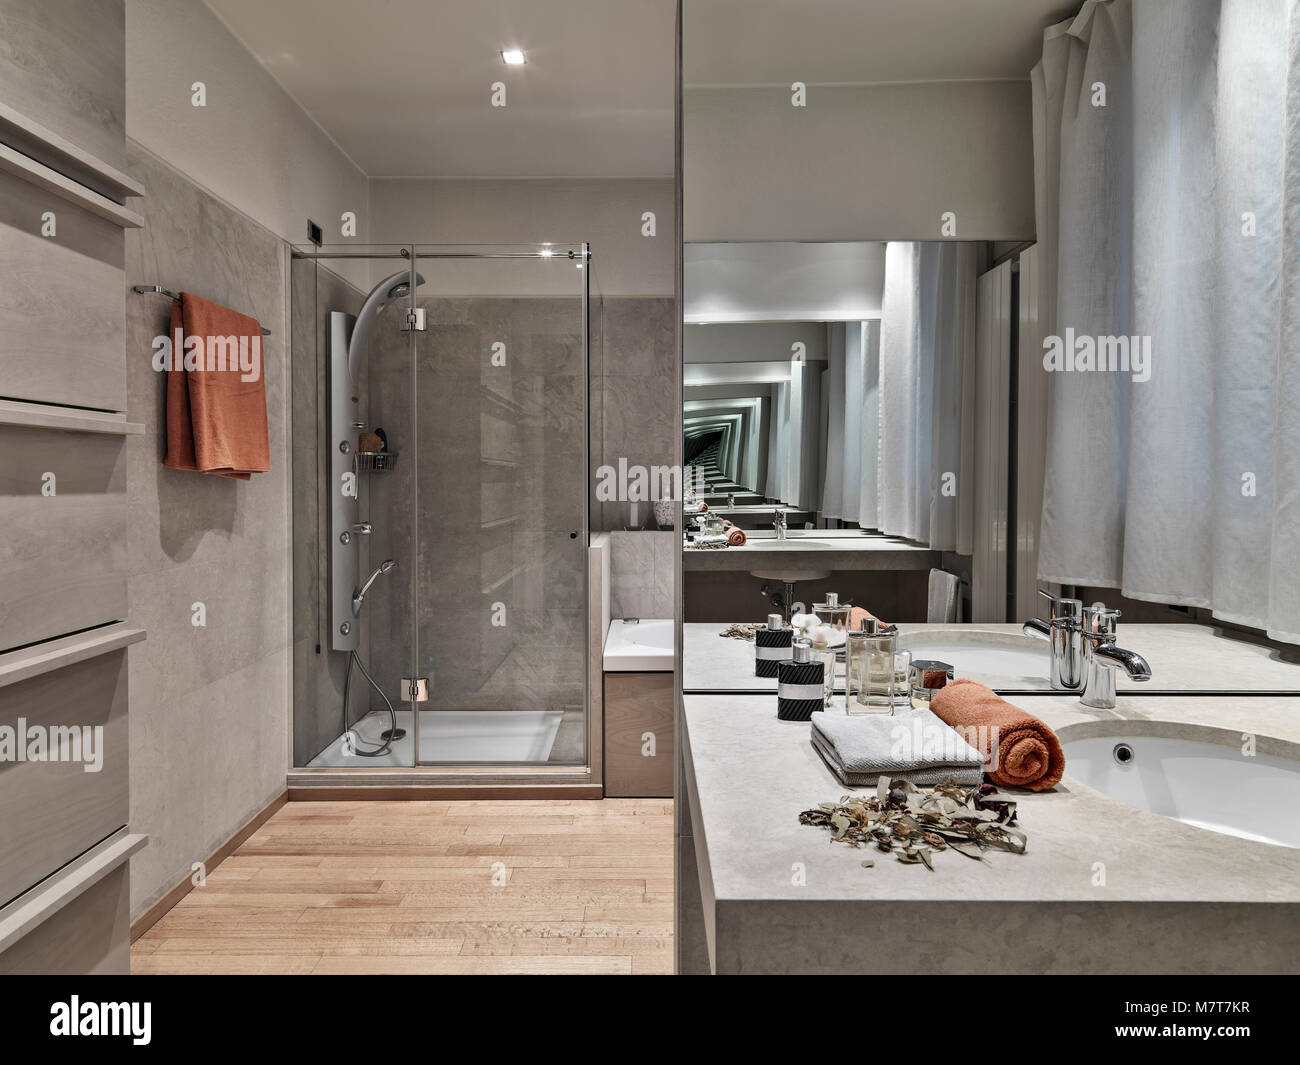 interiors shots of a modern bathroom in foreground the built-in washbasin and big mirror on the background the masonry shower cubicle with glass door, Stock Photo